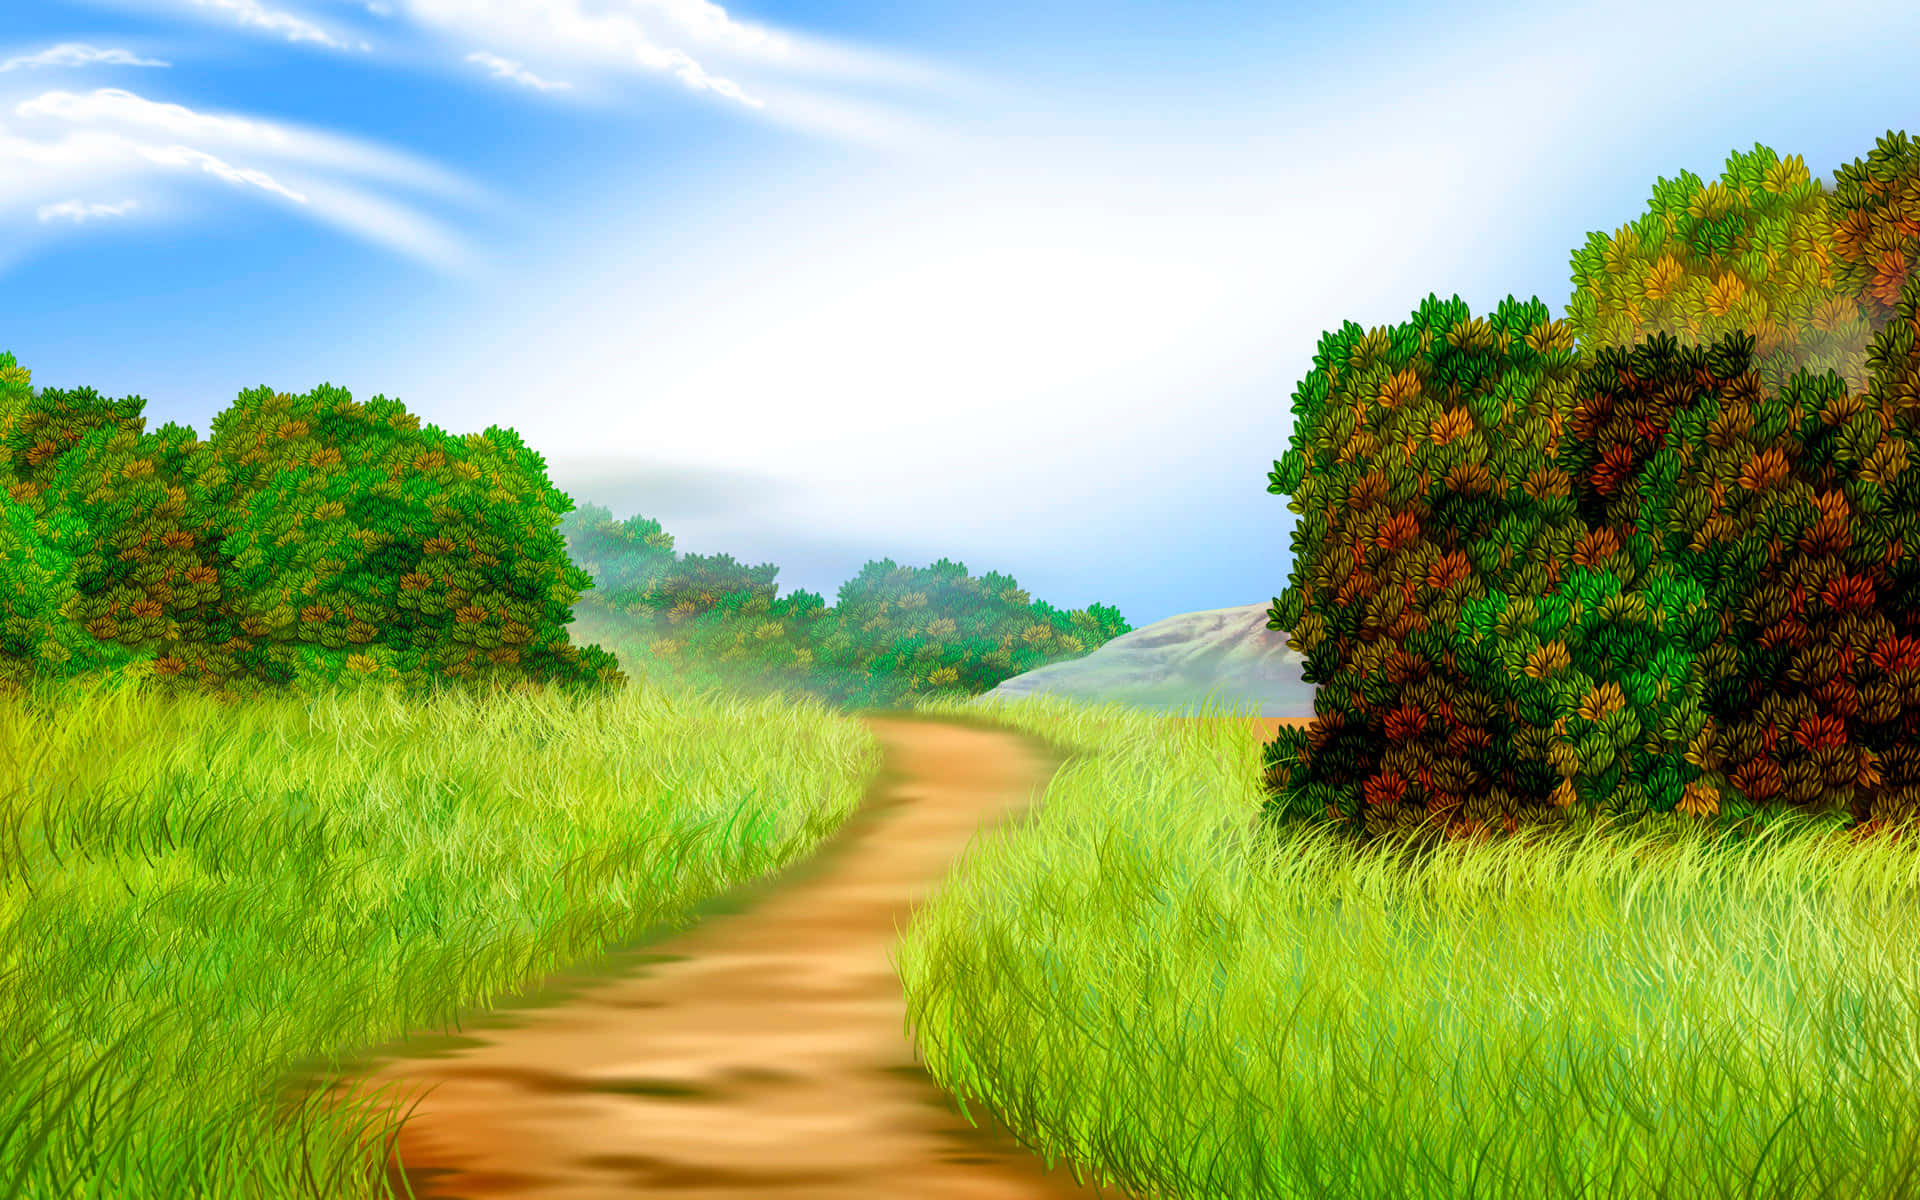 A Painting Of A Path Through The Grass